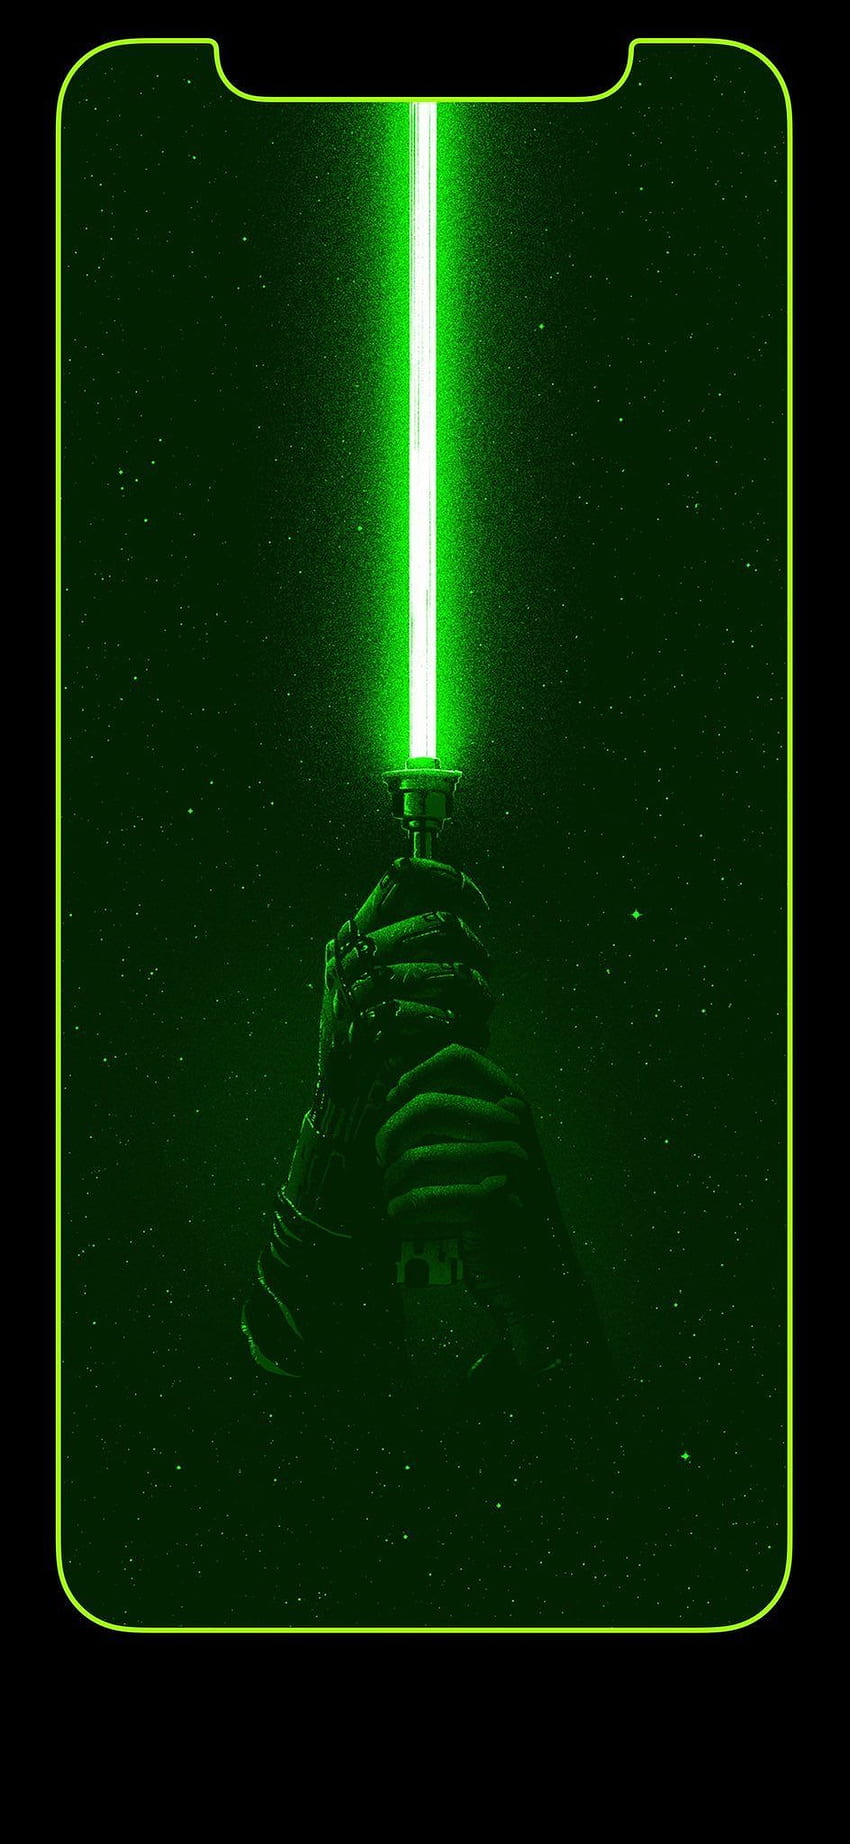 Star Wars Lightsaber  Tap to see more exciting Star Wars wallpaper  mobile9